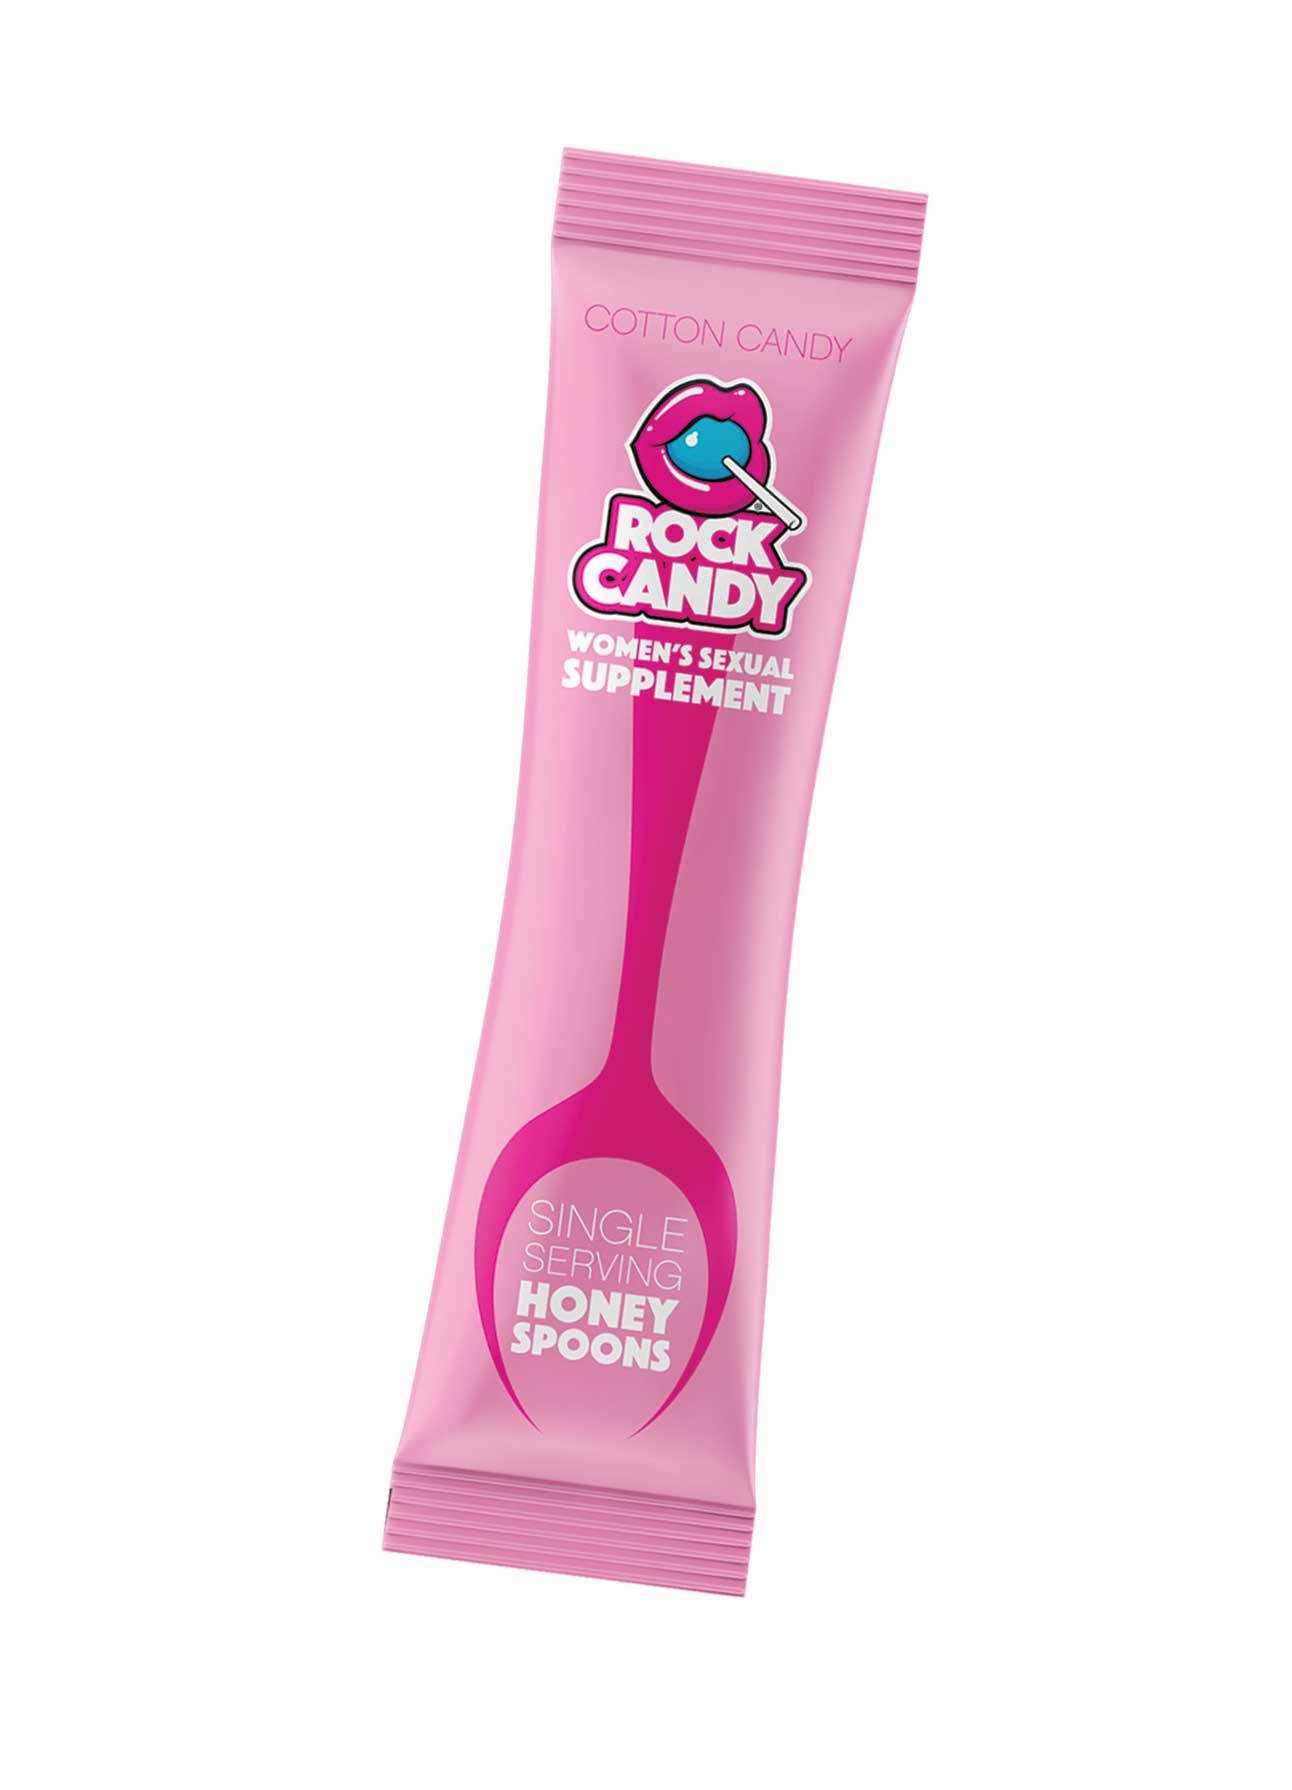 Honey Spoon - Female Sexual Supplement - Cotton  Candy 24 Ct Display-0